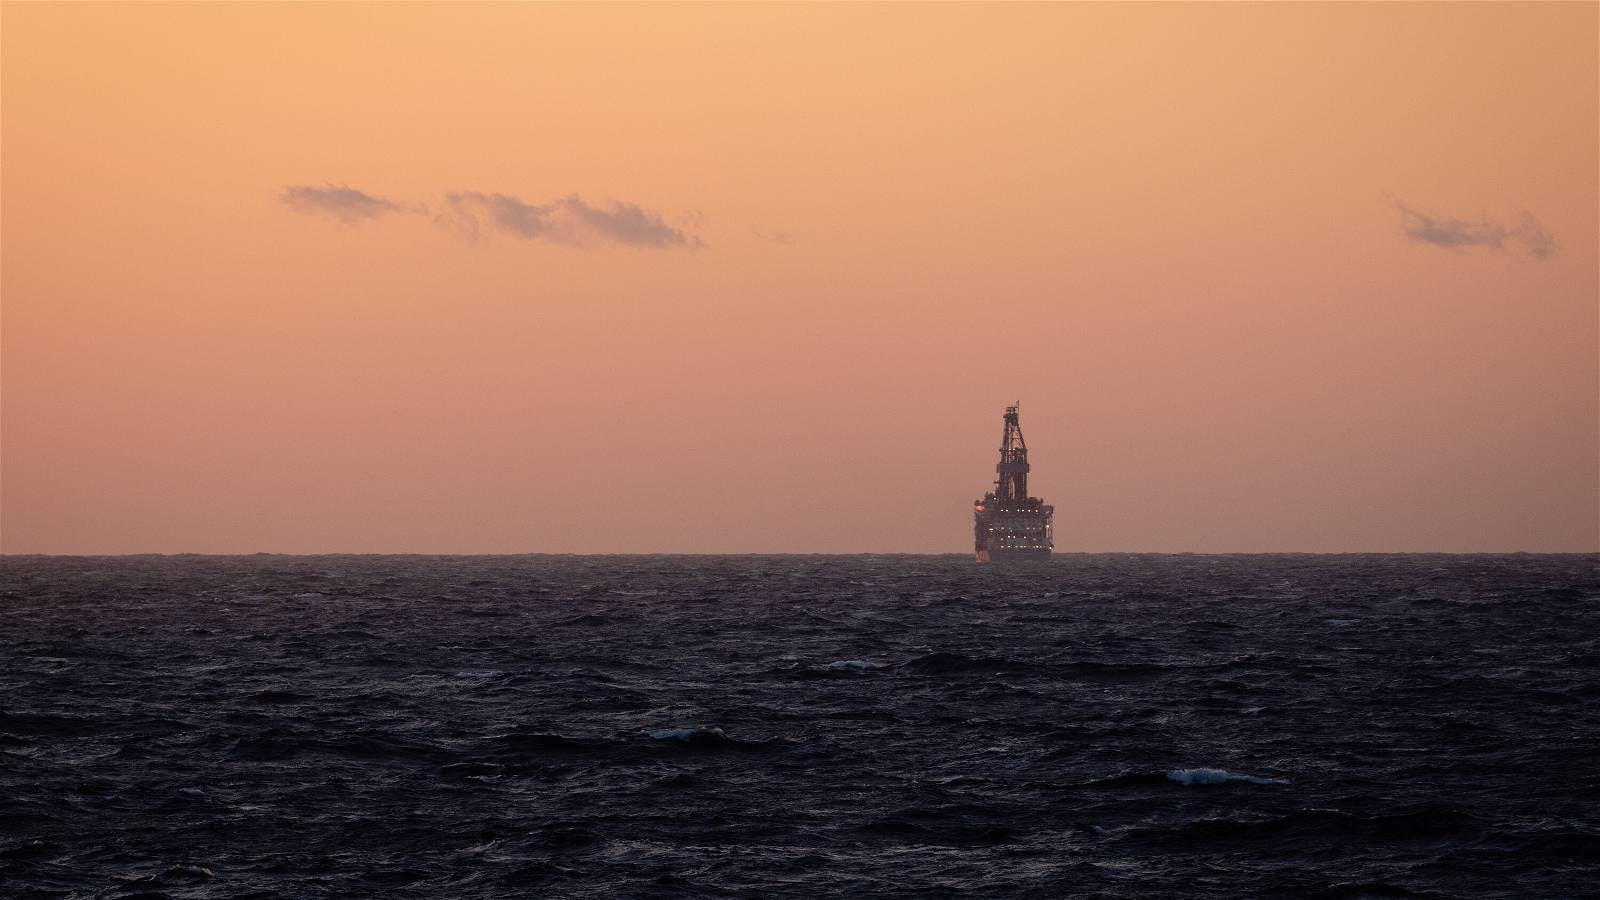 Oil companies expand offshore drilling, pointing to energy needs